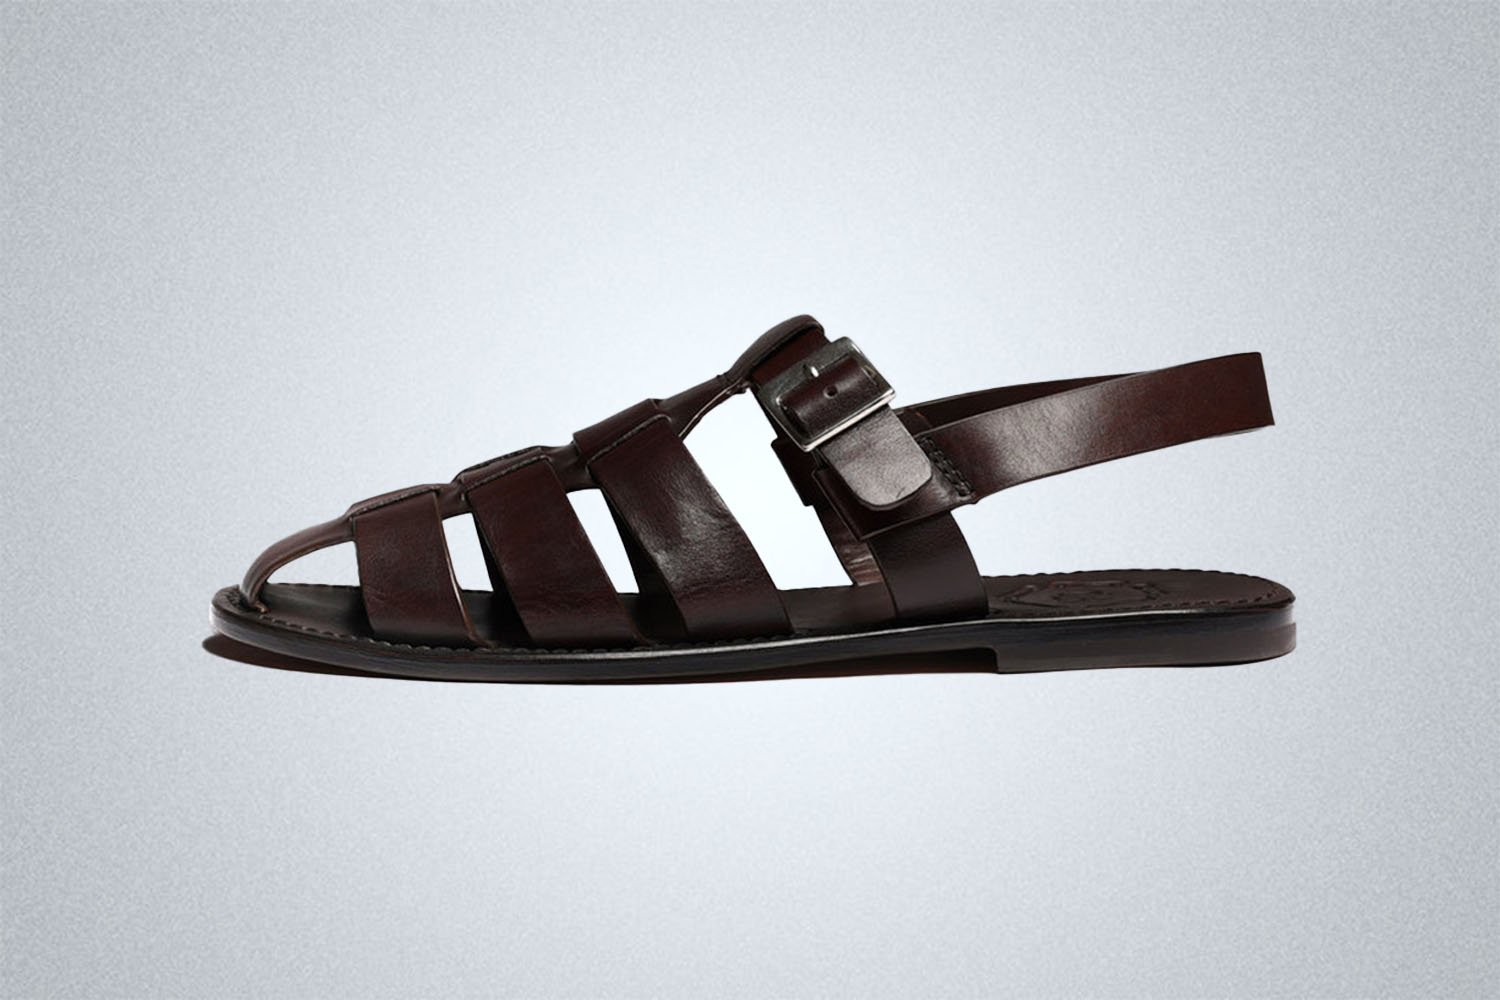 Old Country Clout: Fisherman Sandals Are the Shoe of the Summer